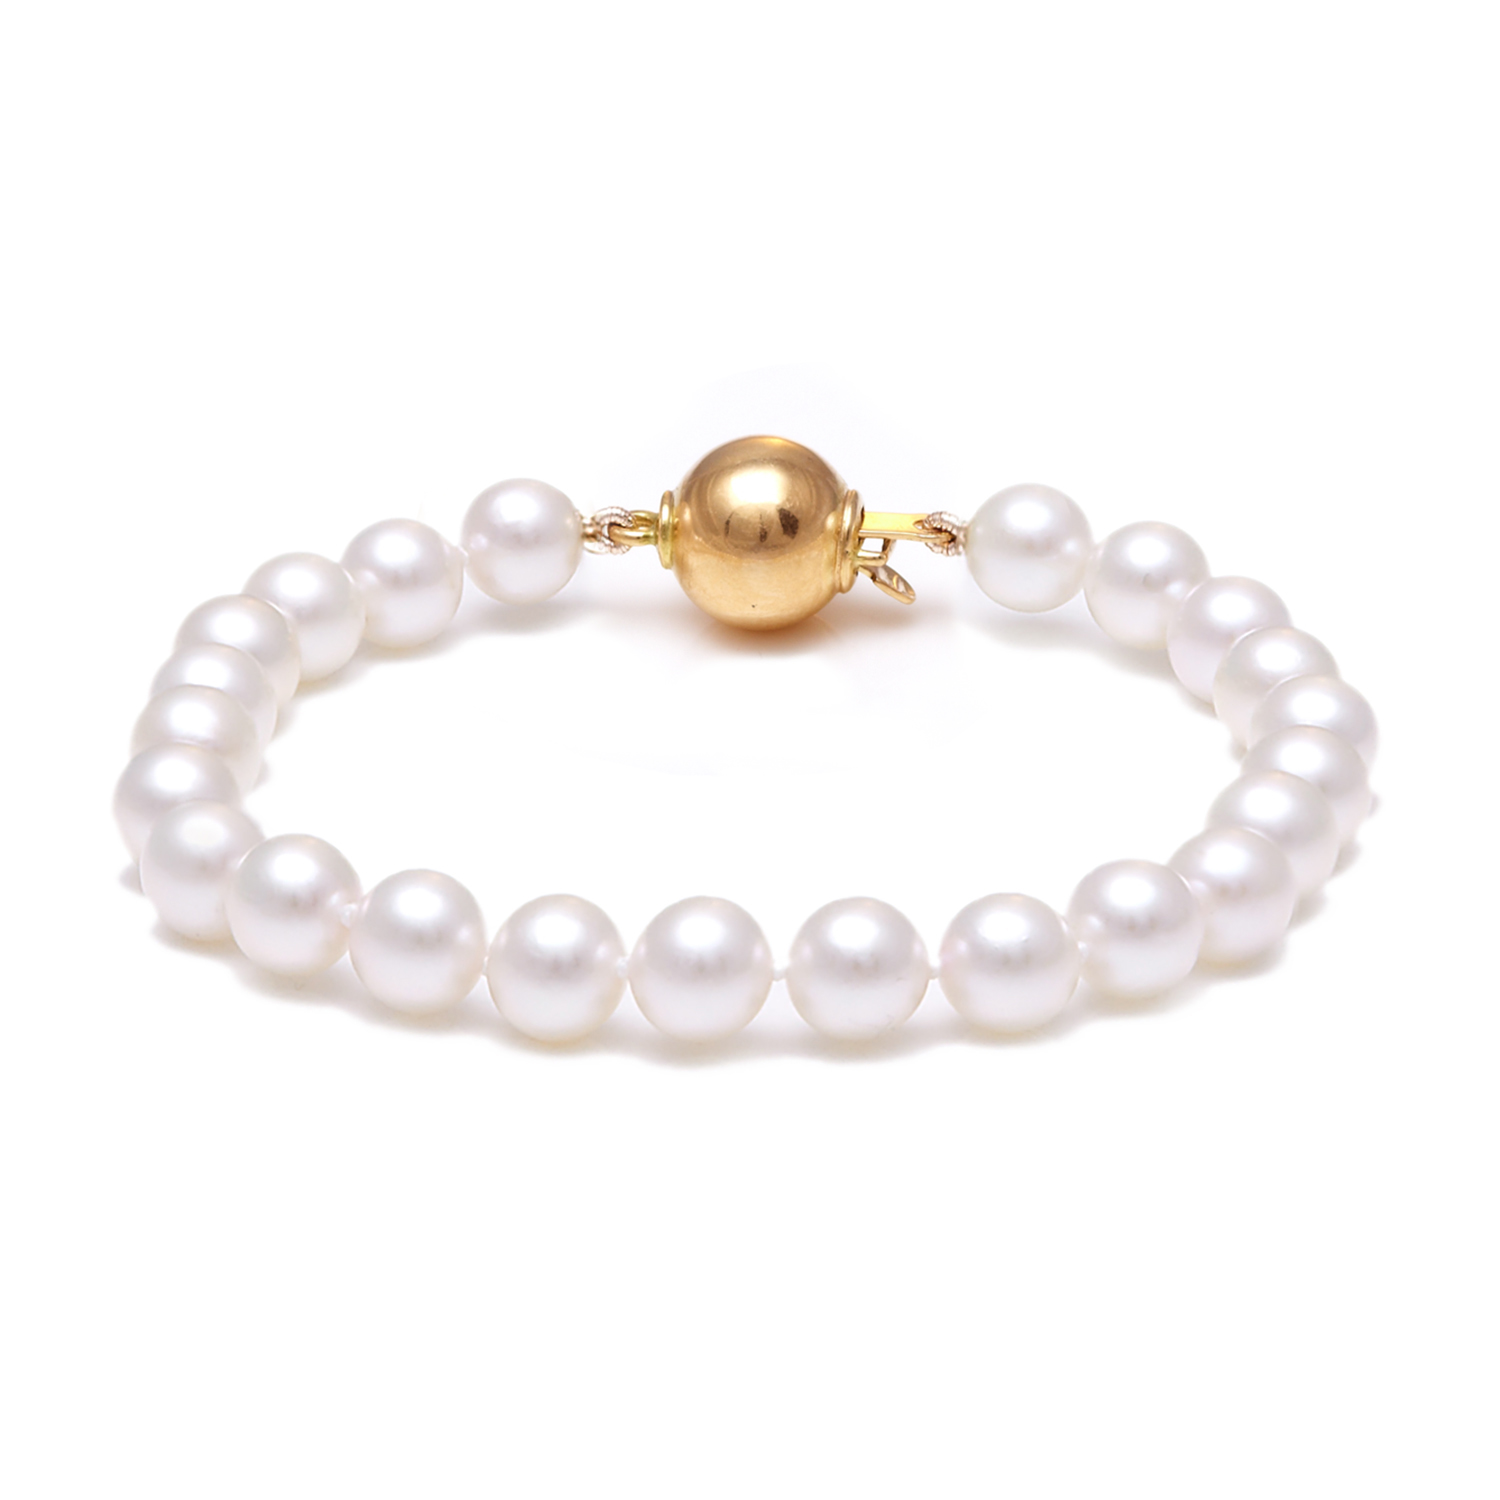 Akoya Pearl Bracelet With 9ct White Gold Clasp - Walker & Hall